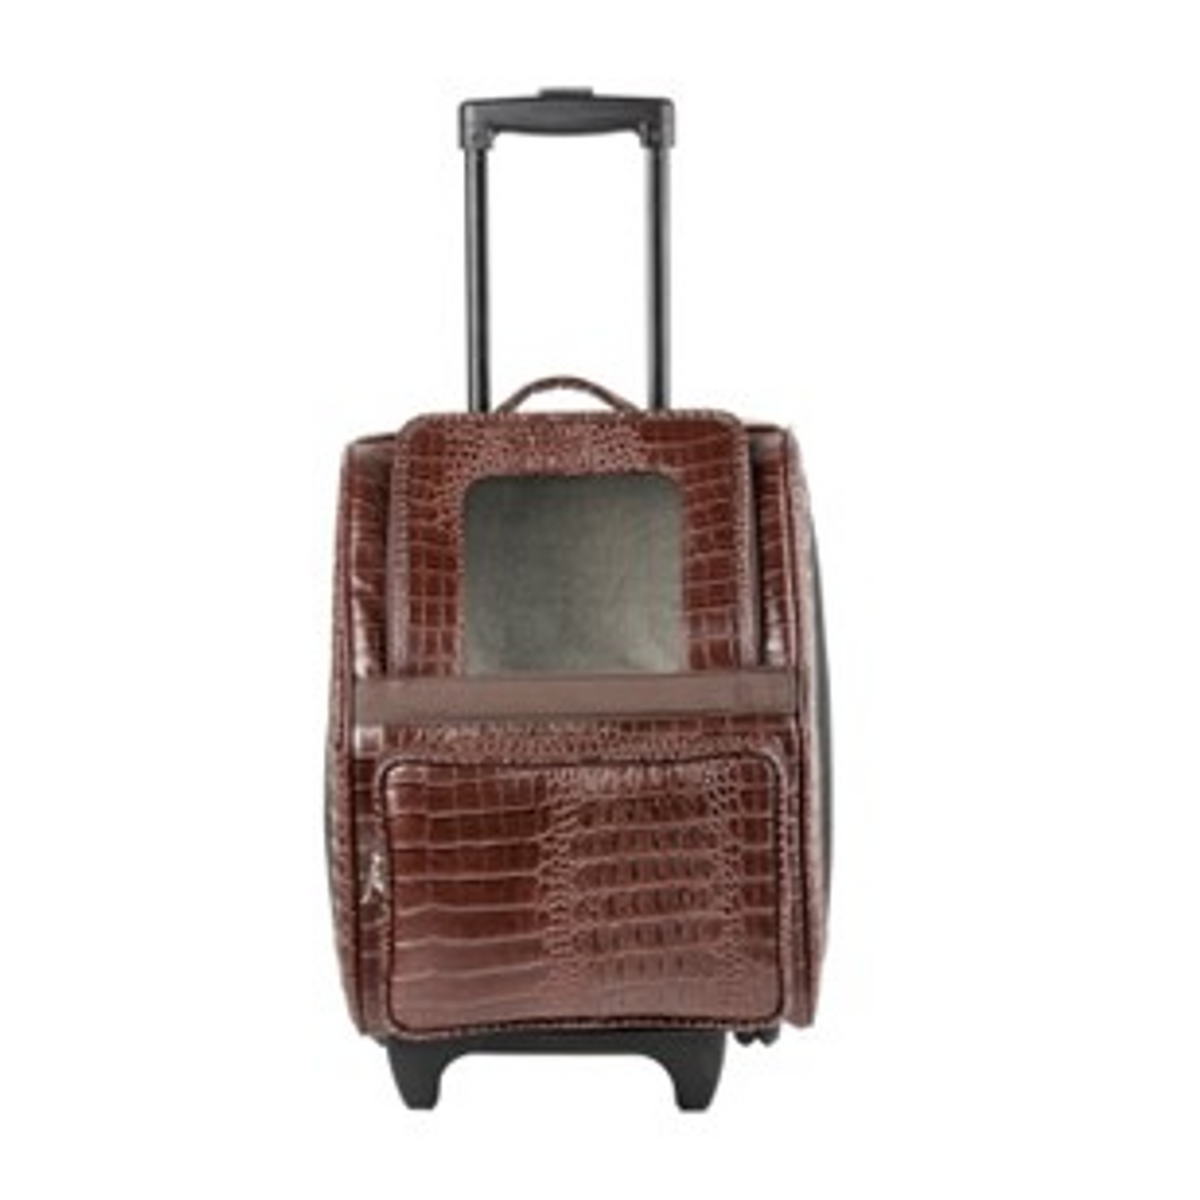 Rio Brown Croc Bag on Wheels - 3 Red Rovers